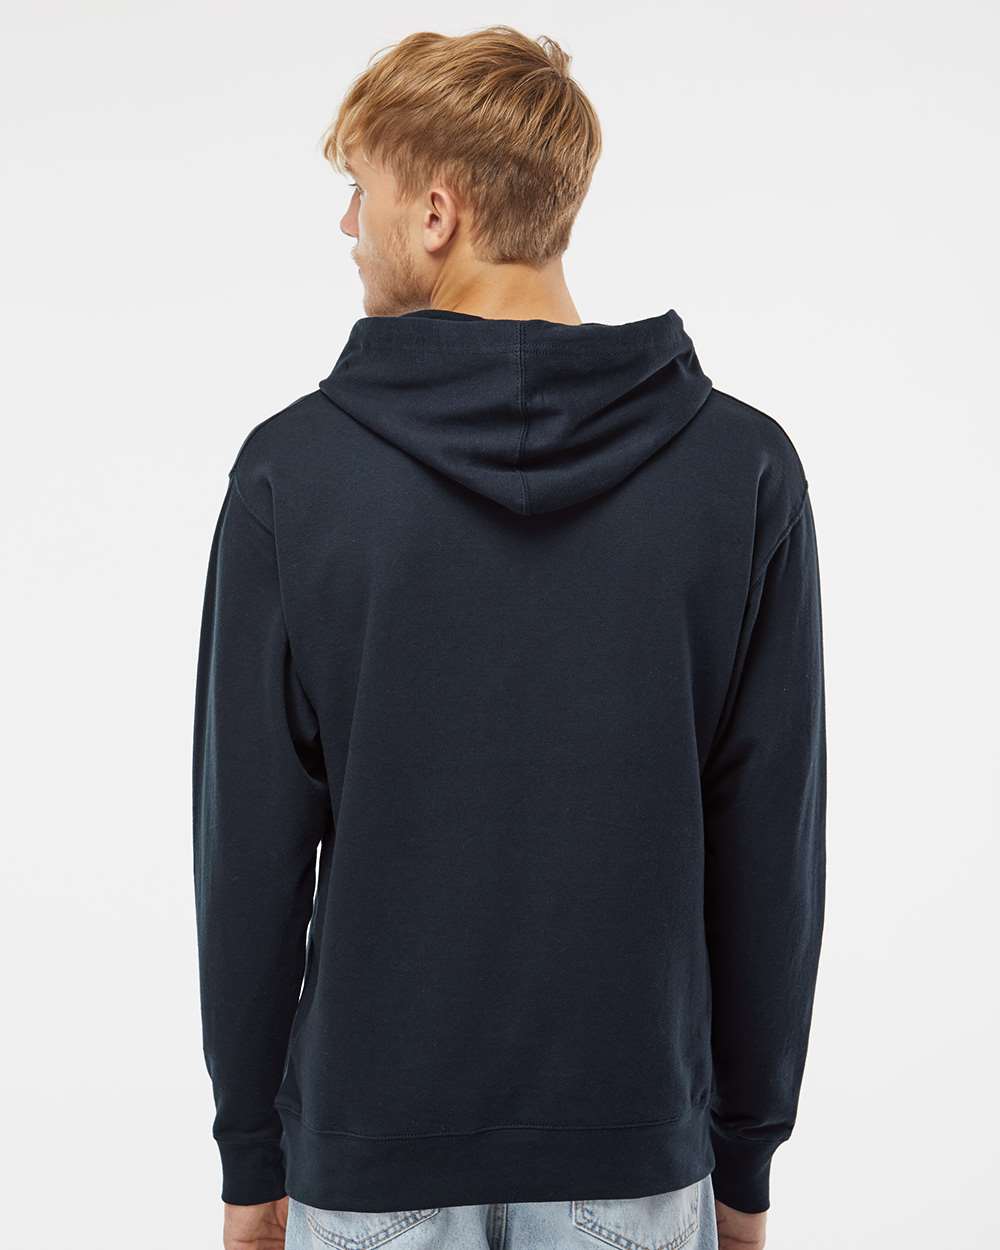 Independent Trading Co. Midweight Hooded Sweatshirt SS4500 #colormdl_Classic Navy